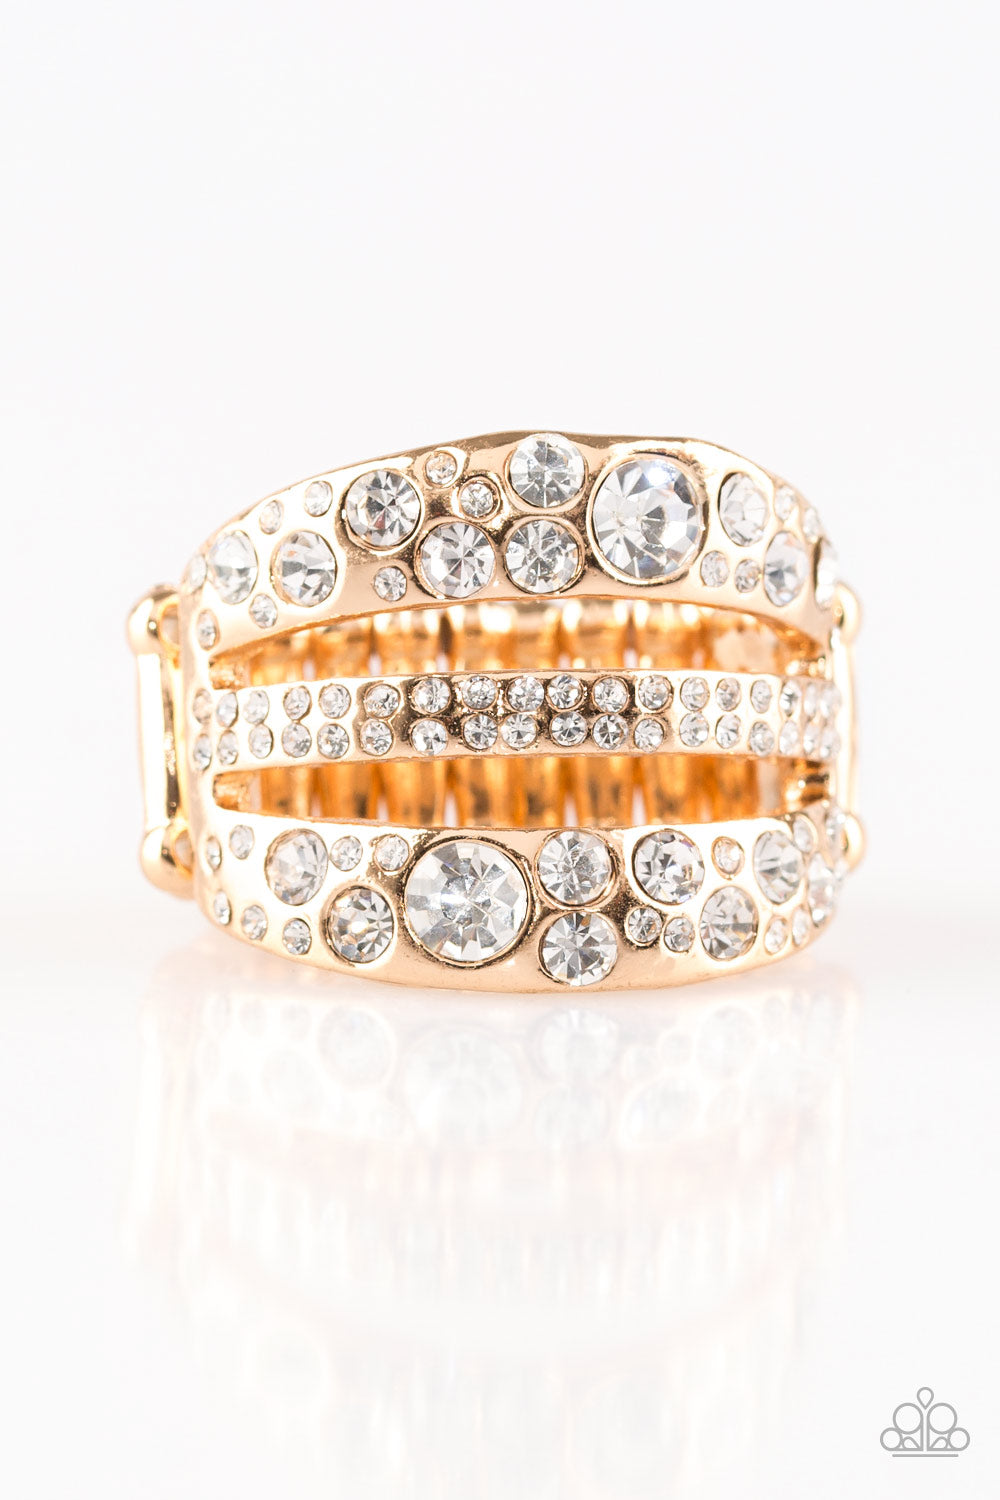 Stacks On Stacks On Stacks Gold Paparazzi Ring Cashmere Pink Jewels